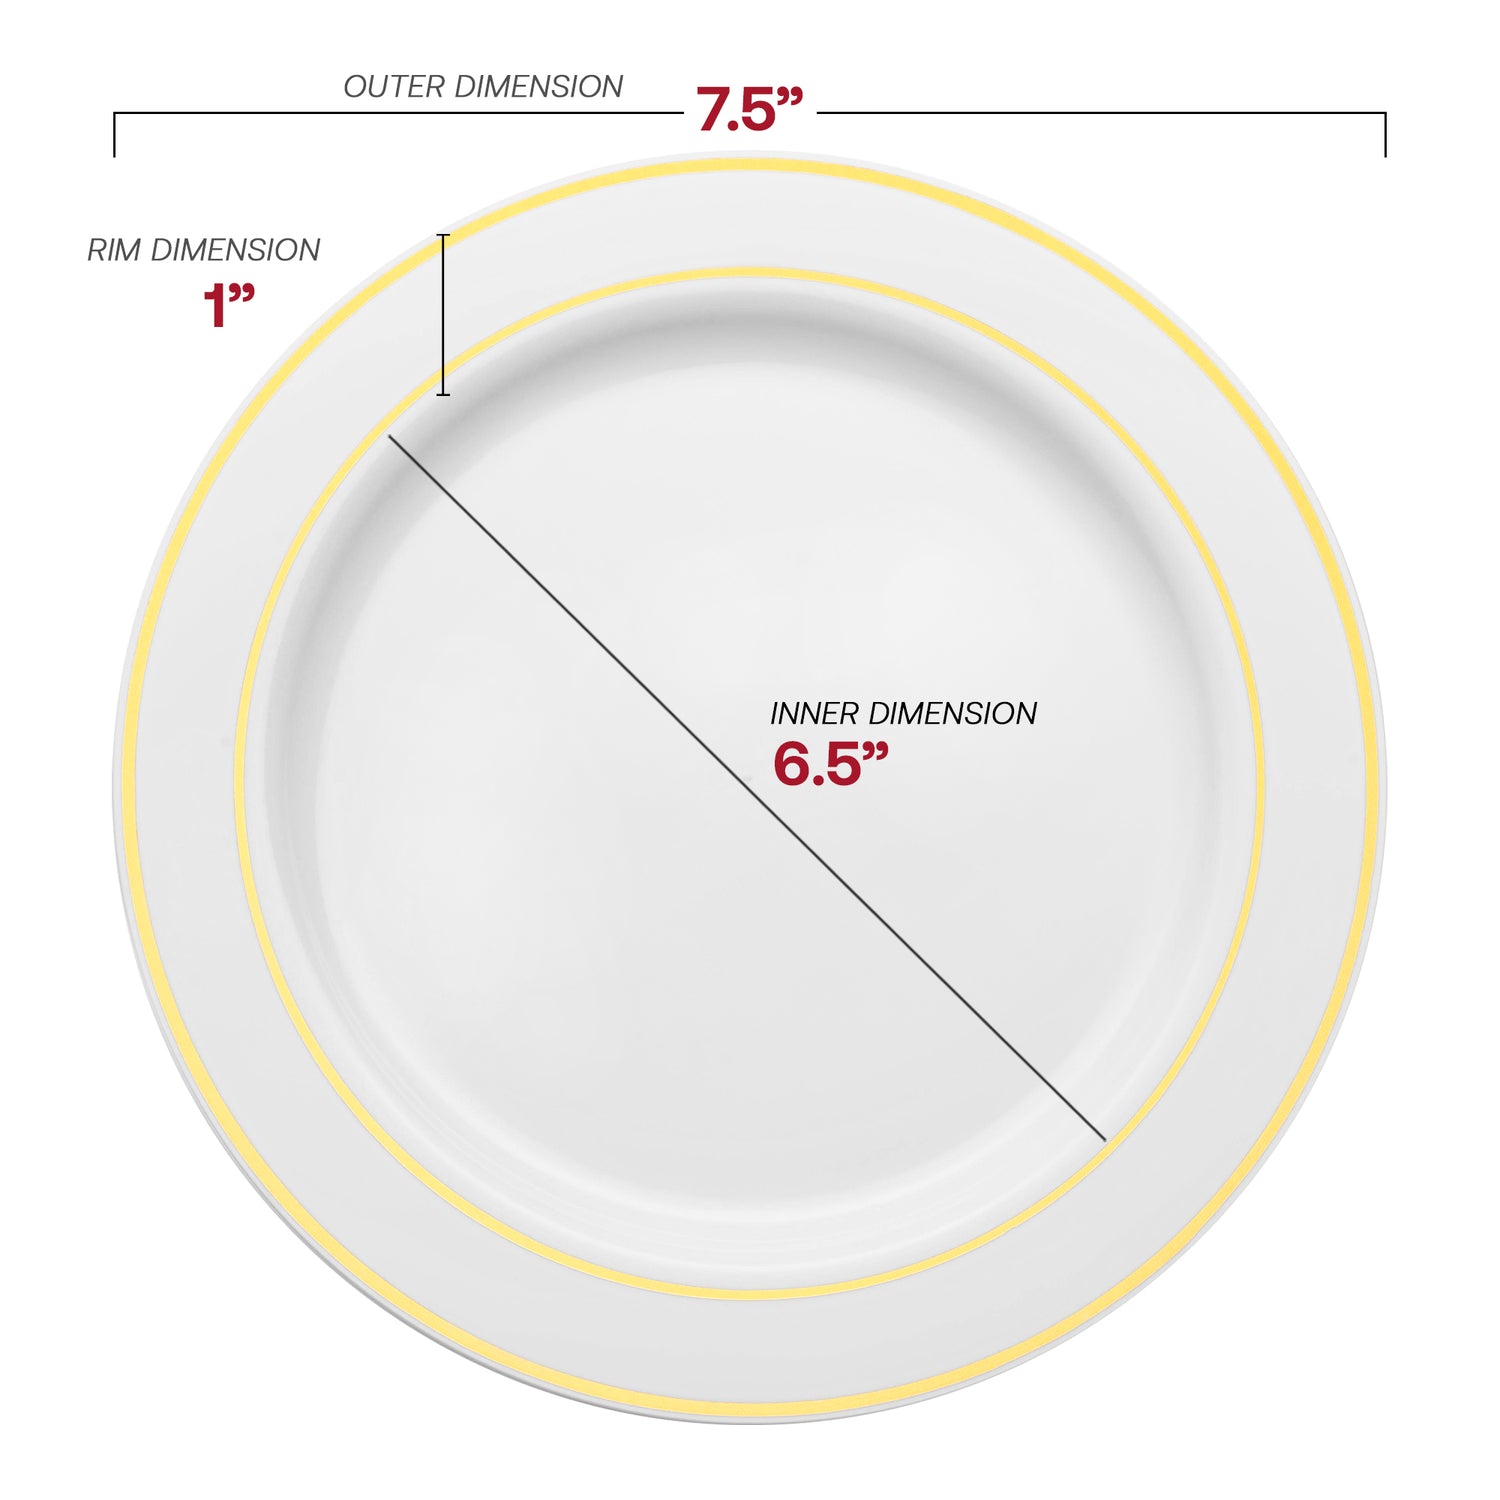 White with Gold Edge Rim Plastic Appetizer/Salad Plates (7.5") Dimension | The Kaya Collection